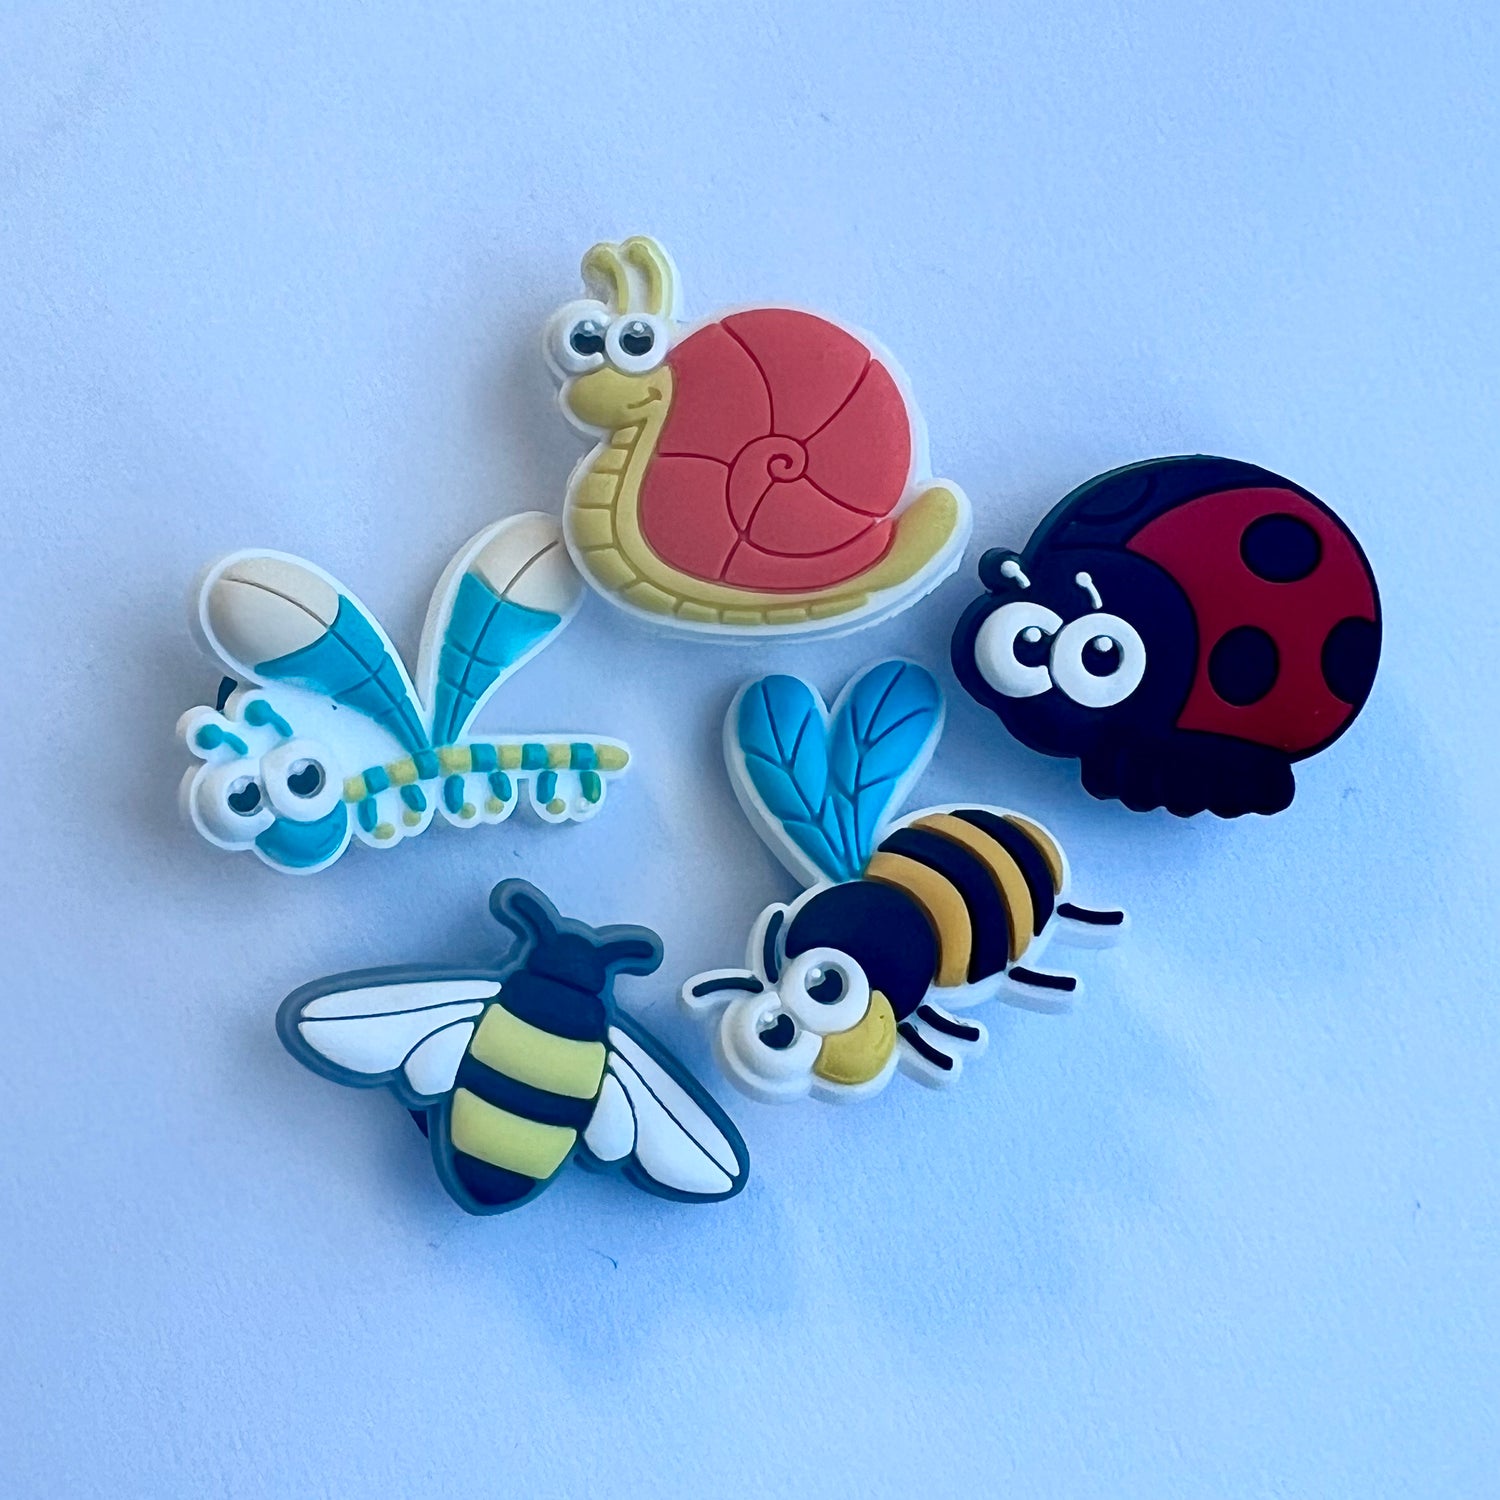 The Insect Charms Pack